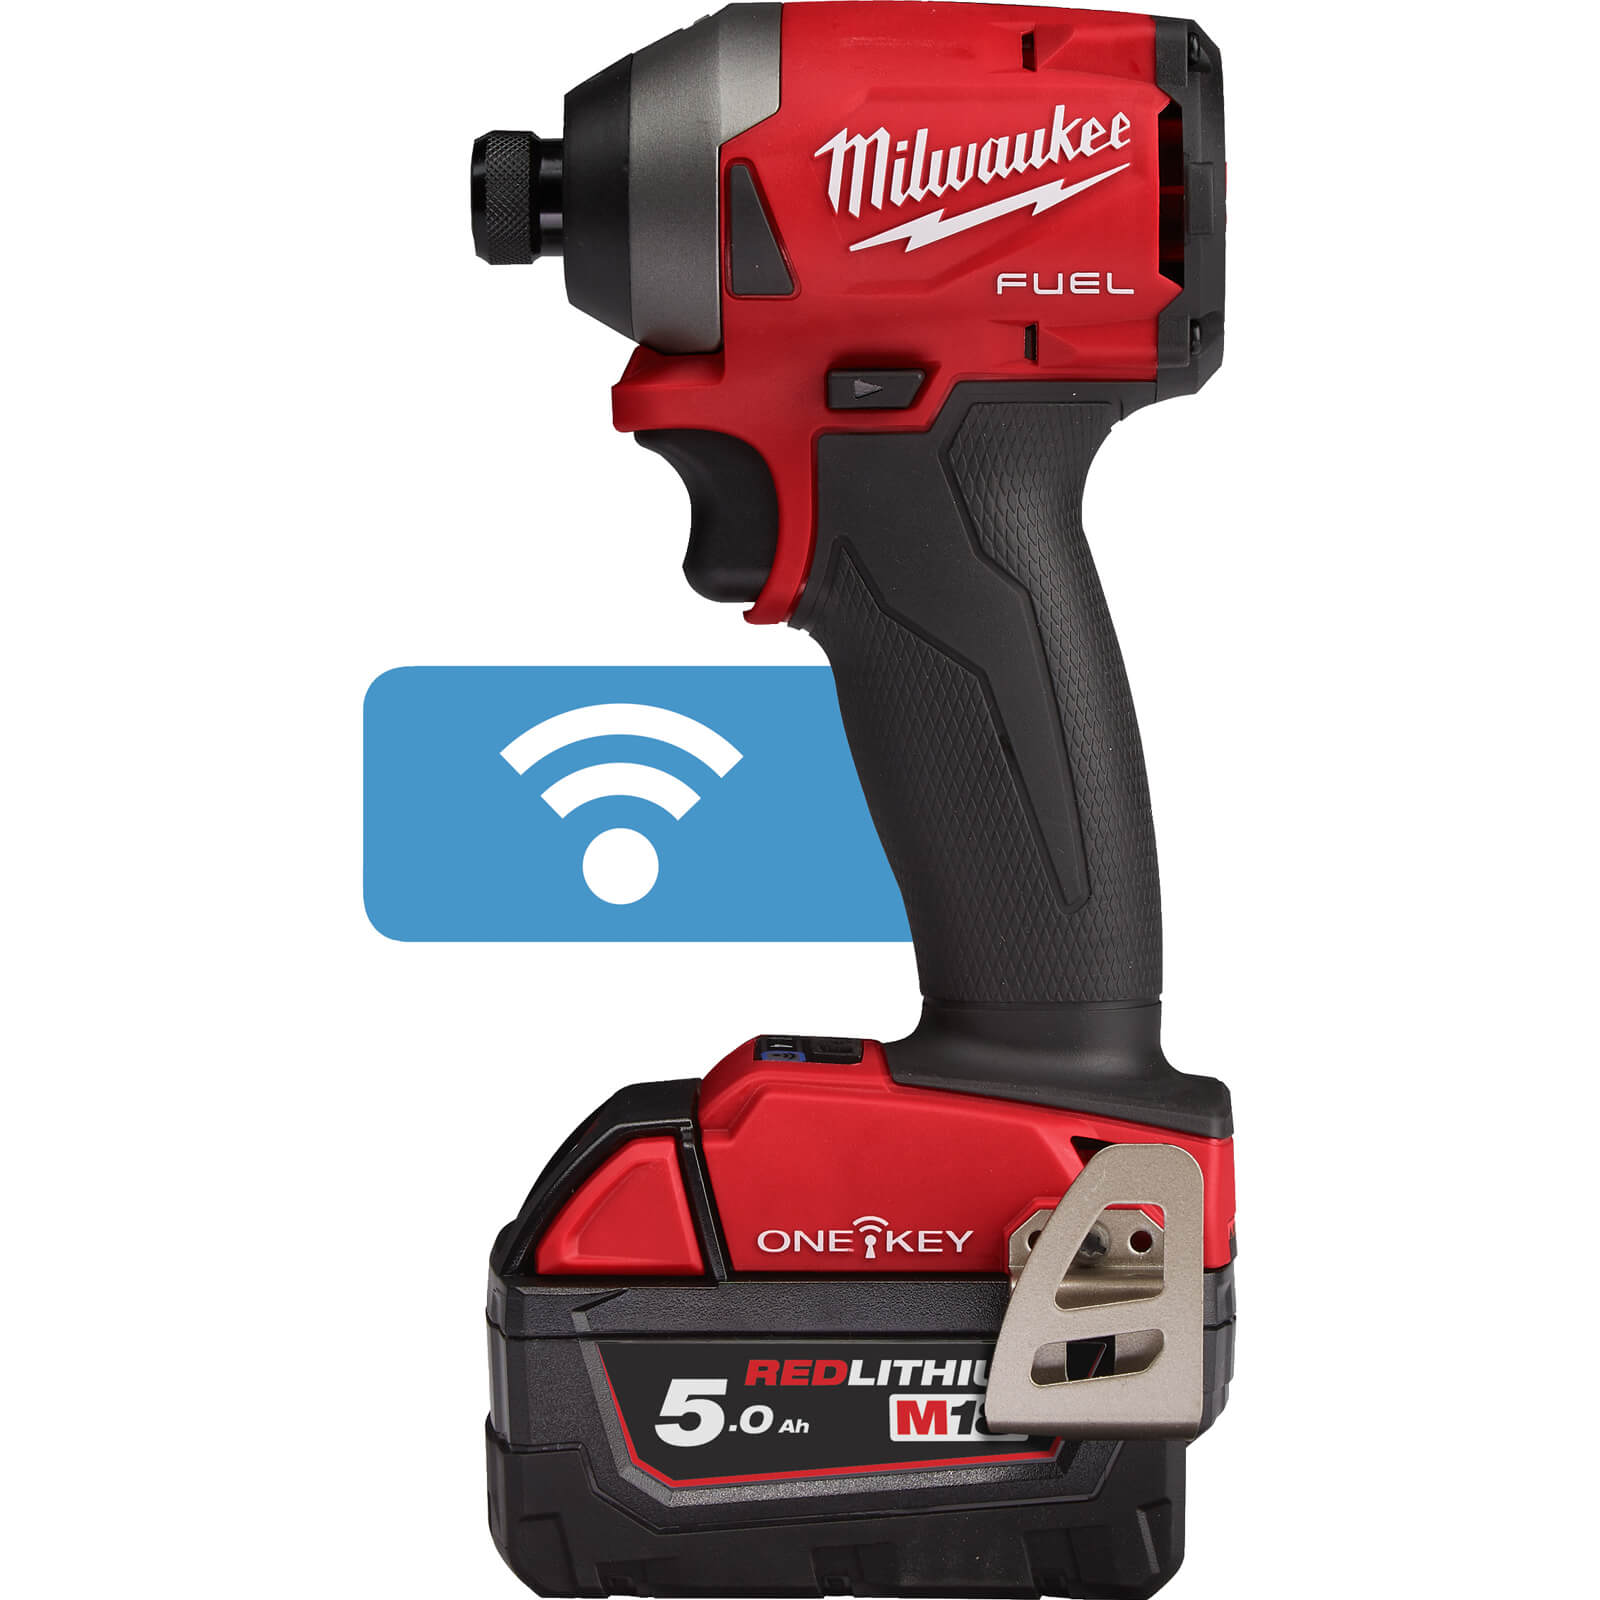 Image of Milwaukee M18 ONEID2 Fuel 18v Cordless Brushless Impact Driver 2 x 5ah Li-ion Charger Case